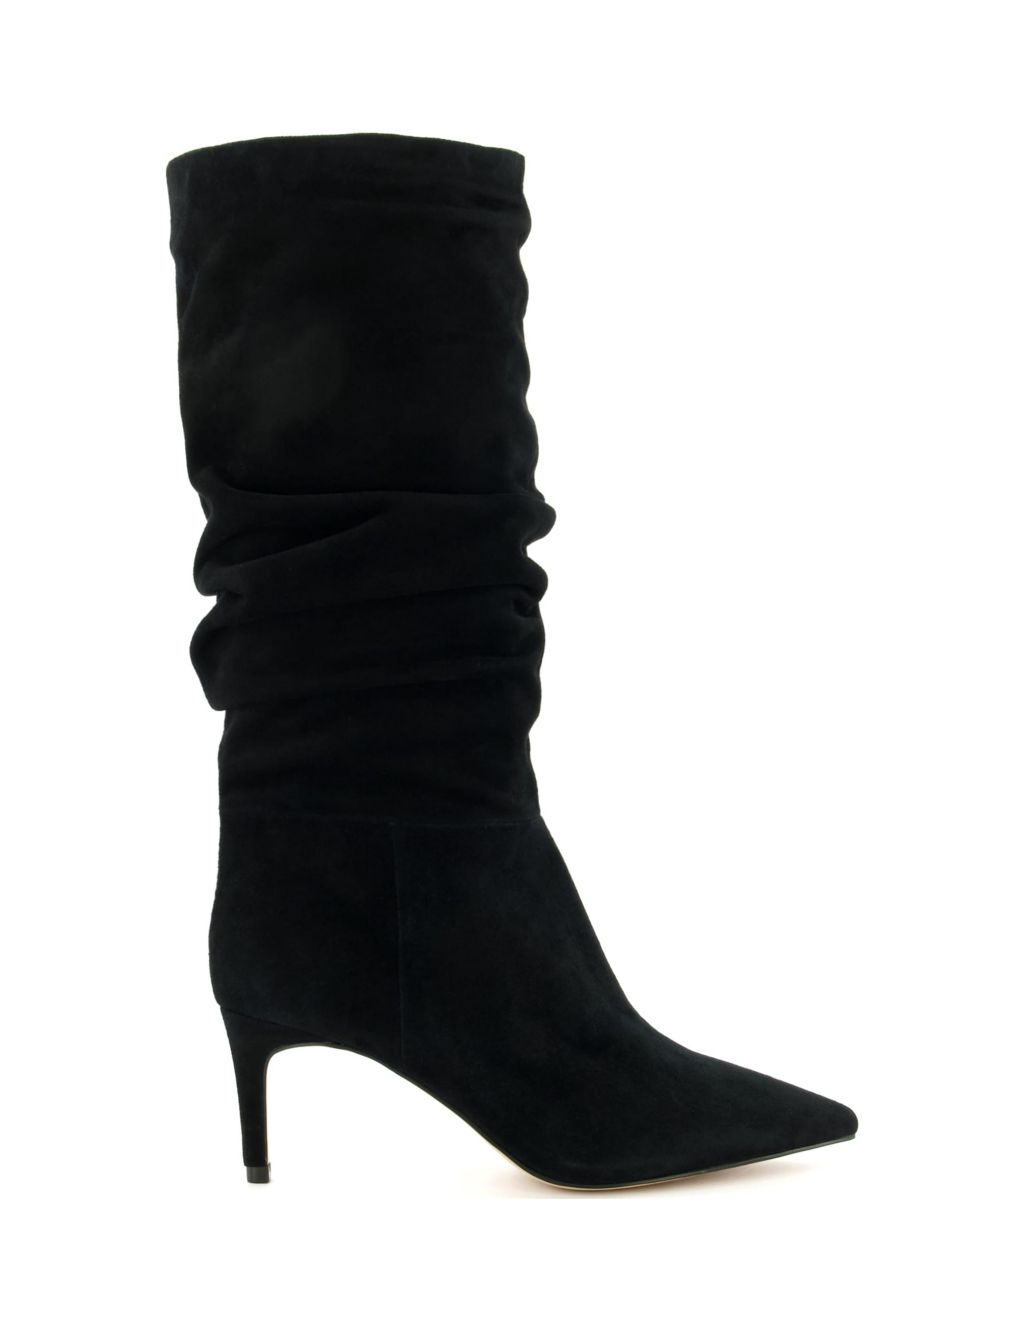 Suede Stiletto Heel Pointed Knee High Boots | Dune London | M&S